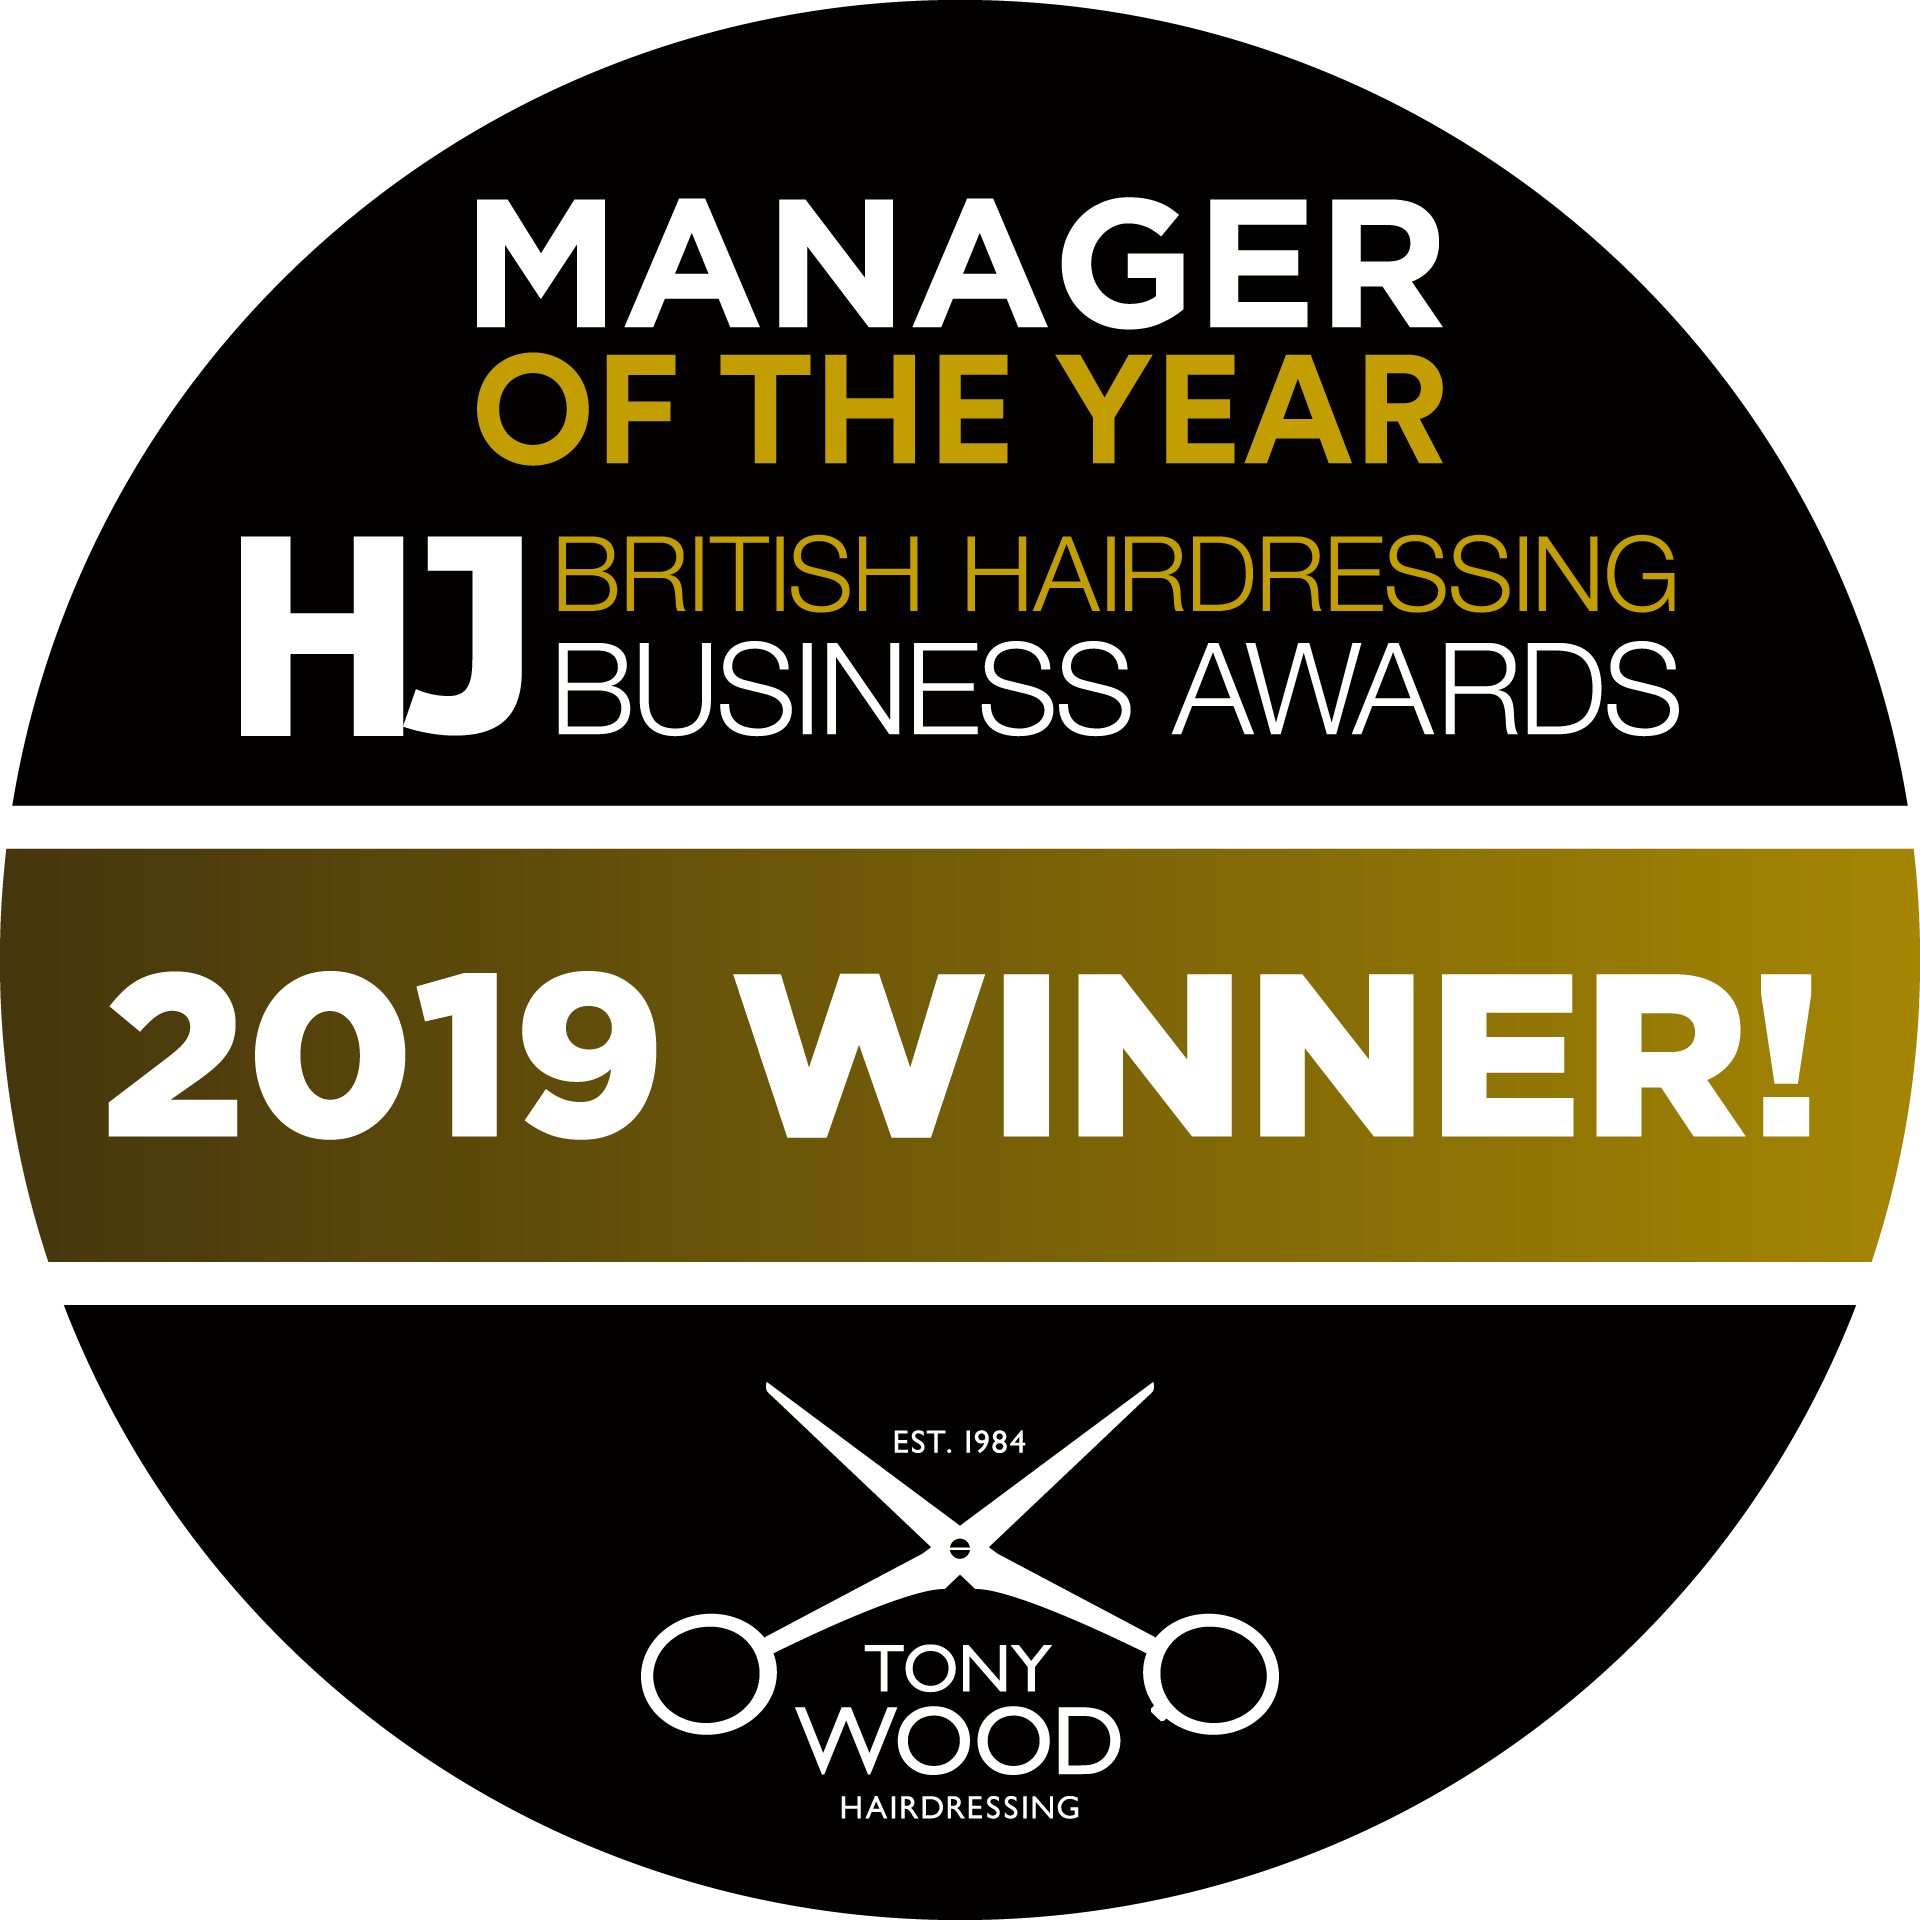 British Hairdressing Business Awards Manager of the Year 2019